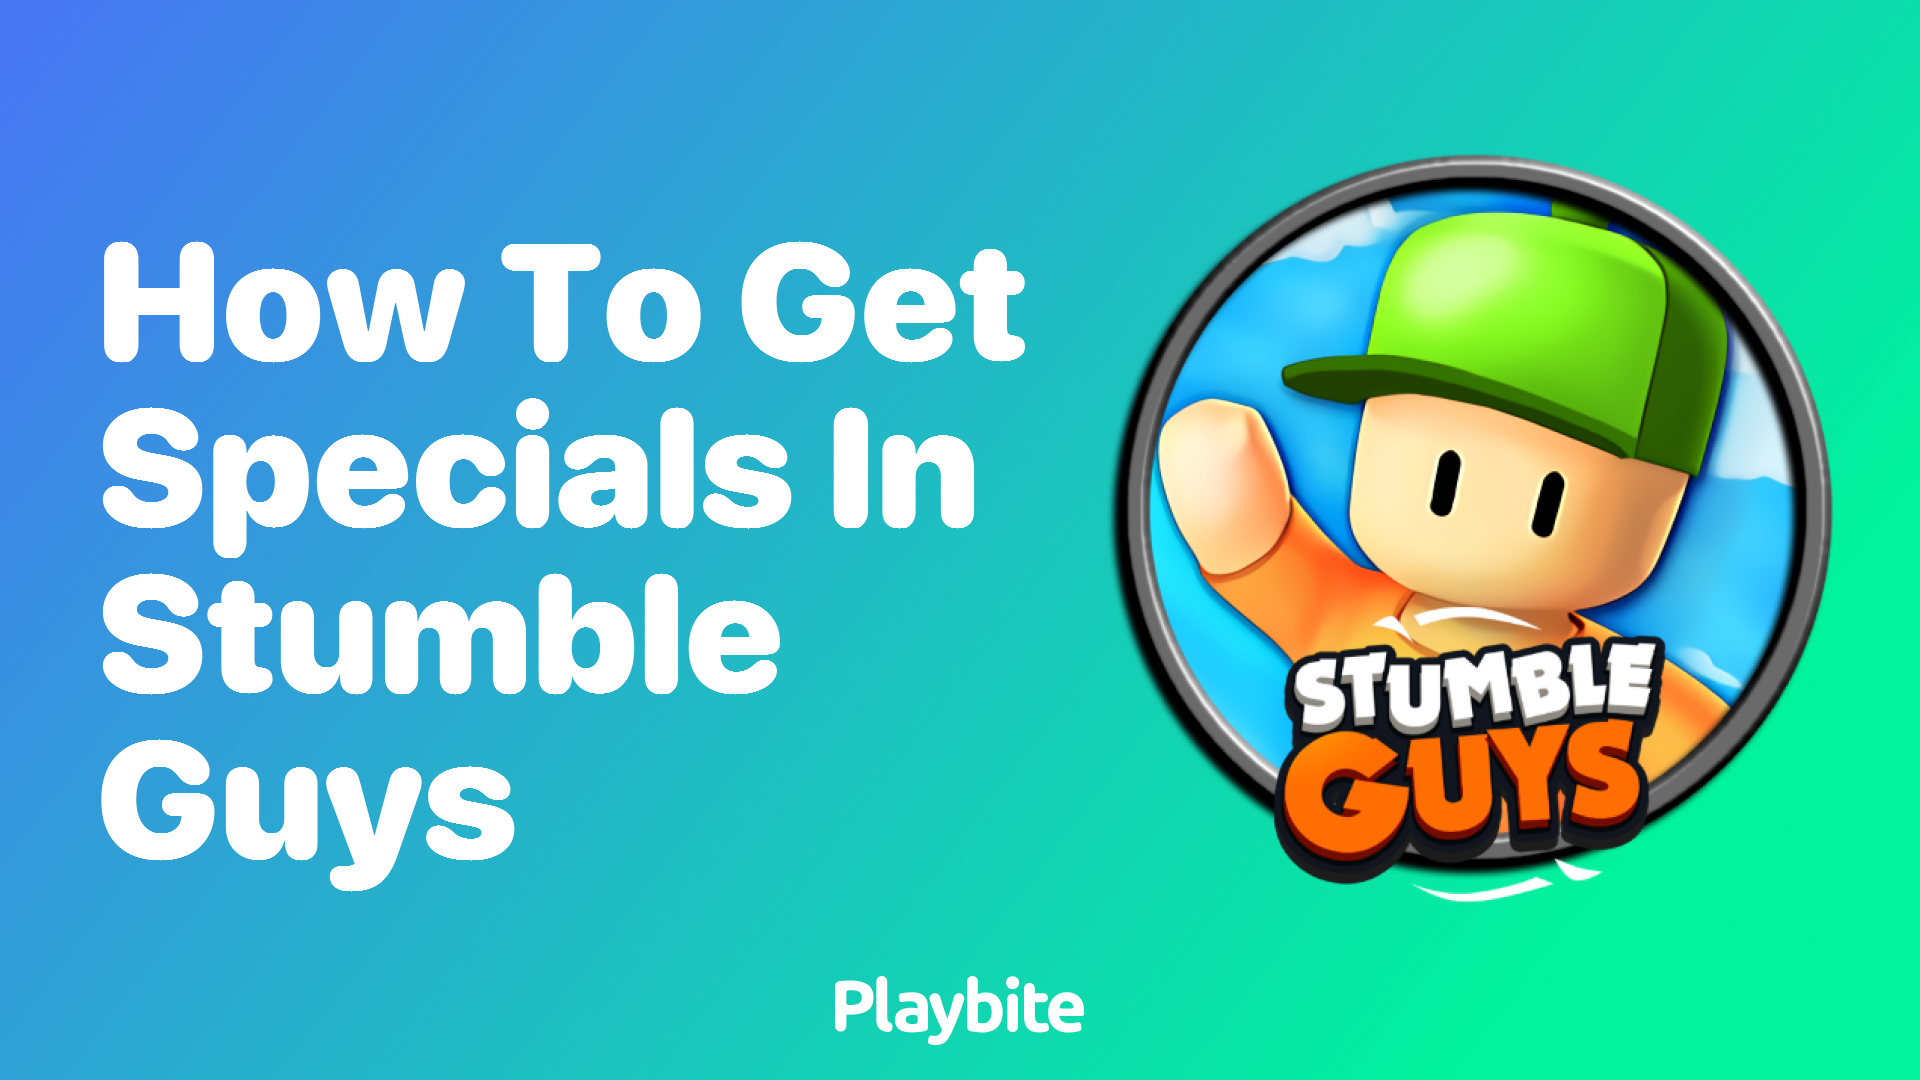 How to Get Specials in Stumble Guys: A Simple Guide